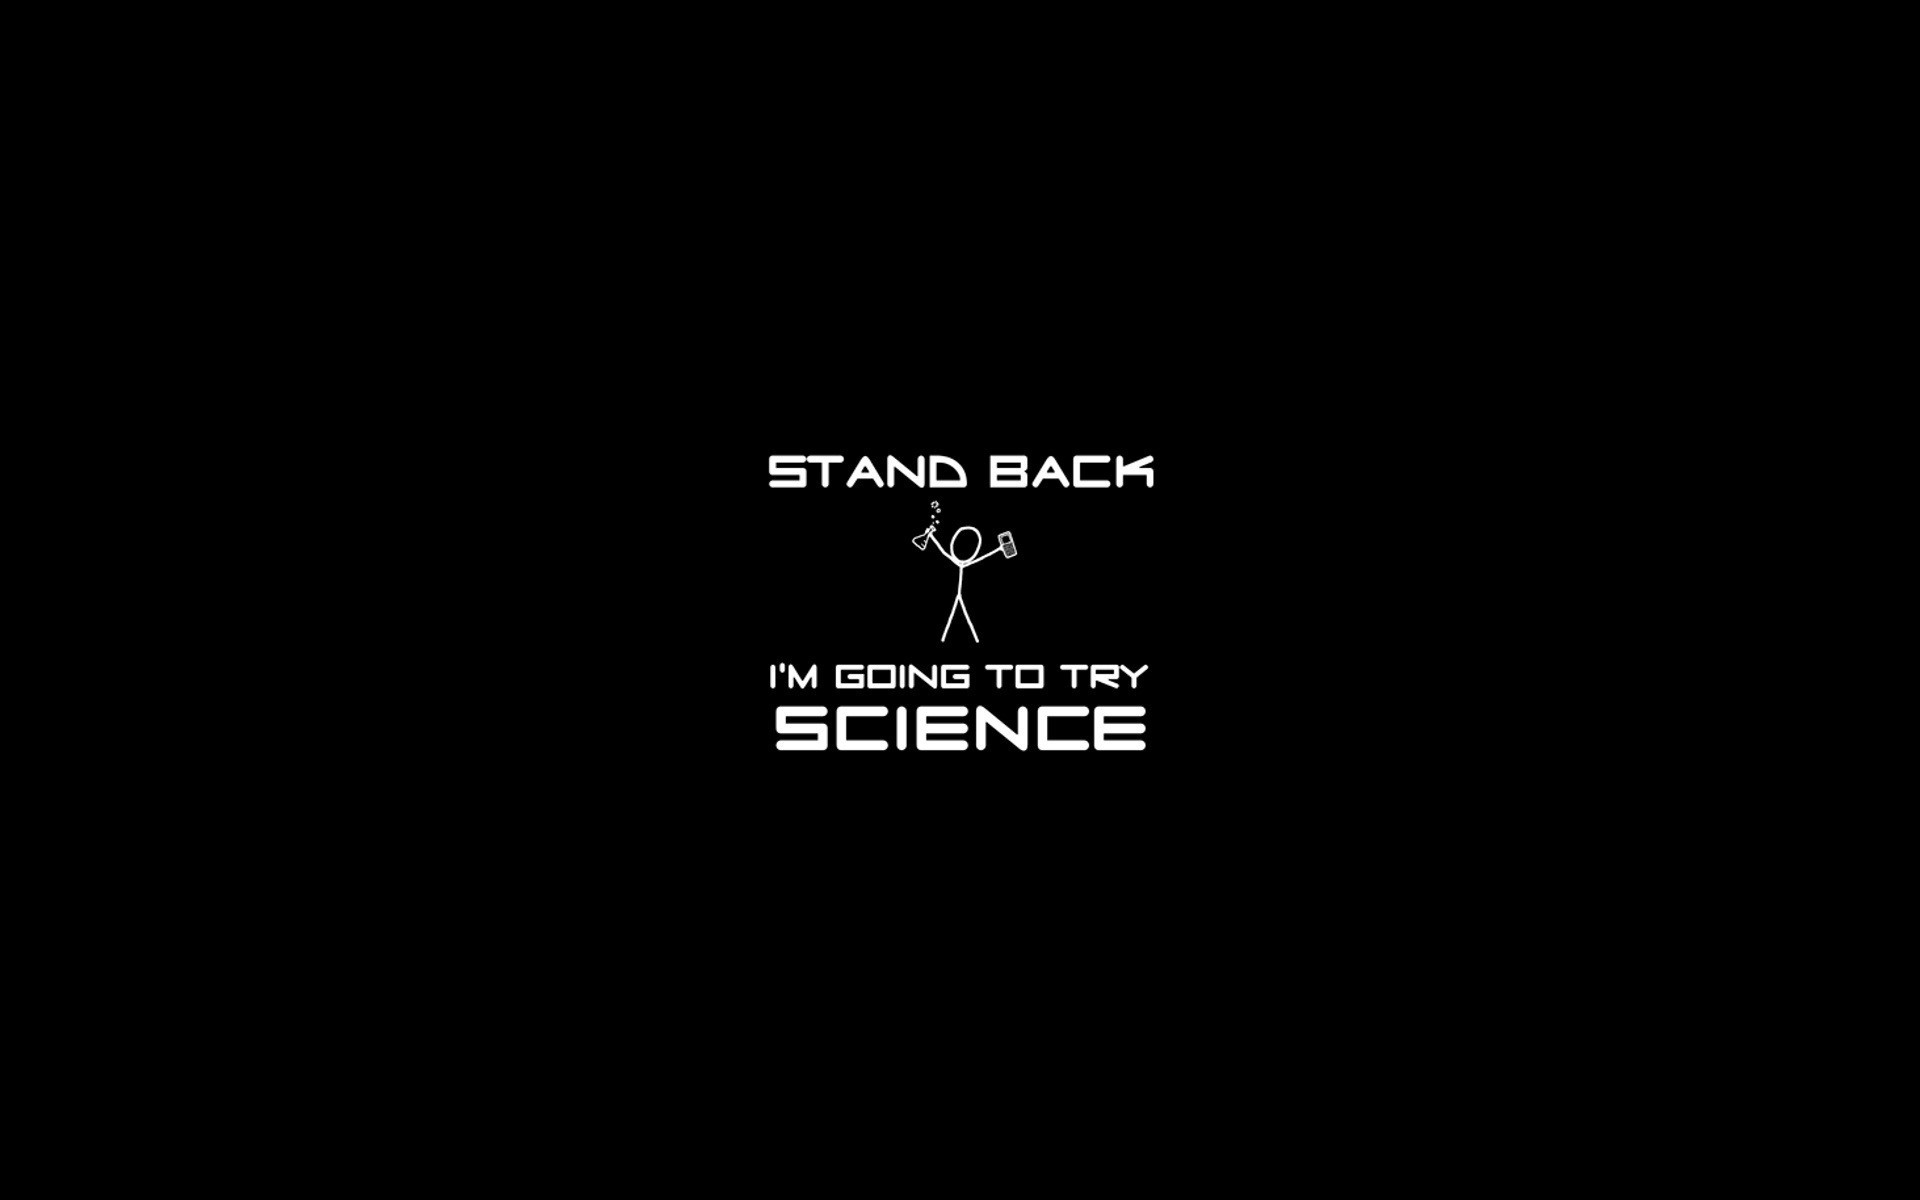 General 1920x1200 xkcd stick figure humor science Randall Munroe simple background minimalism typography